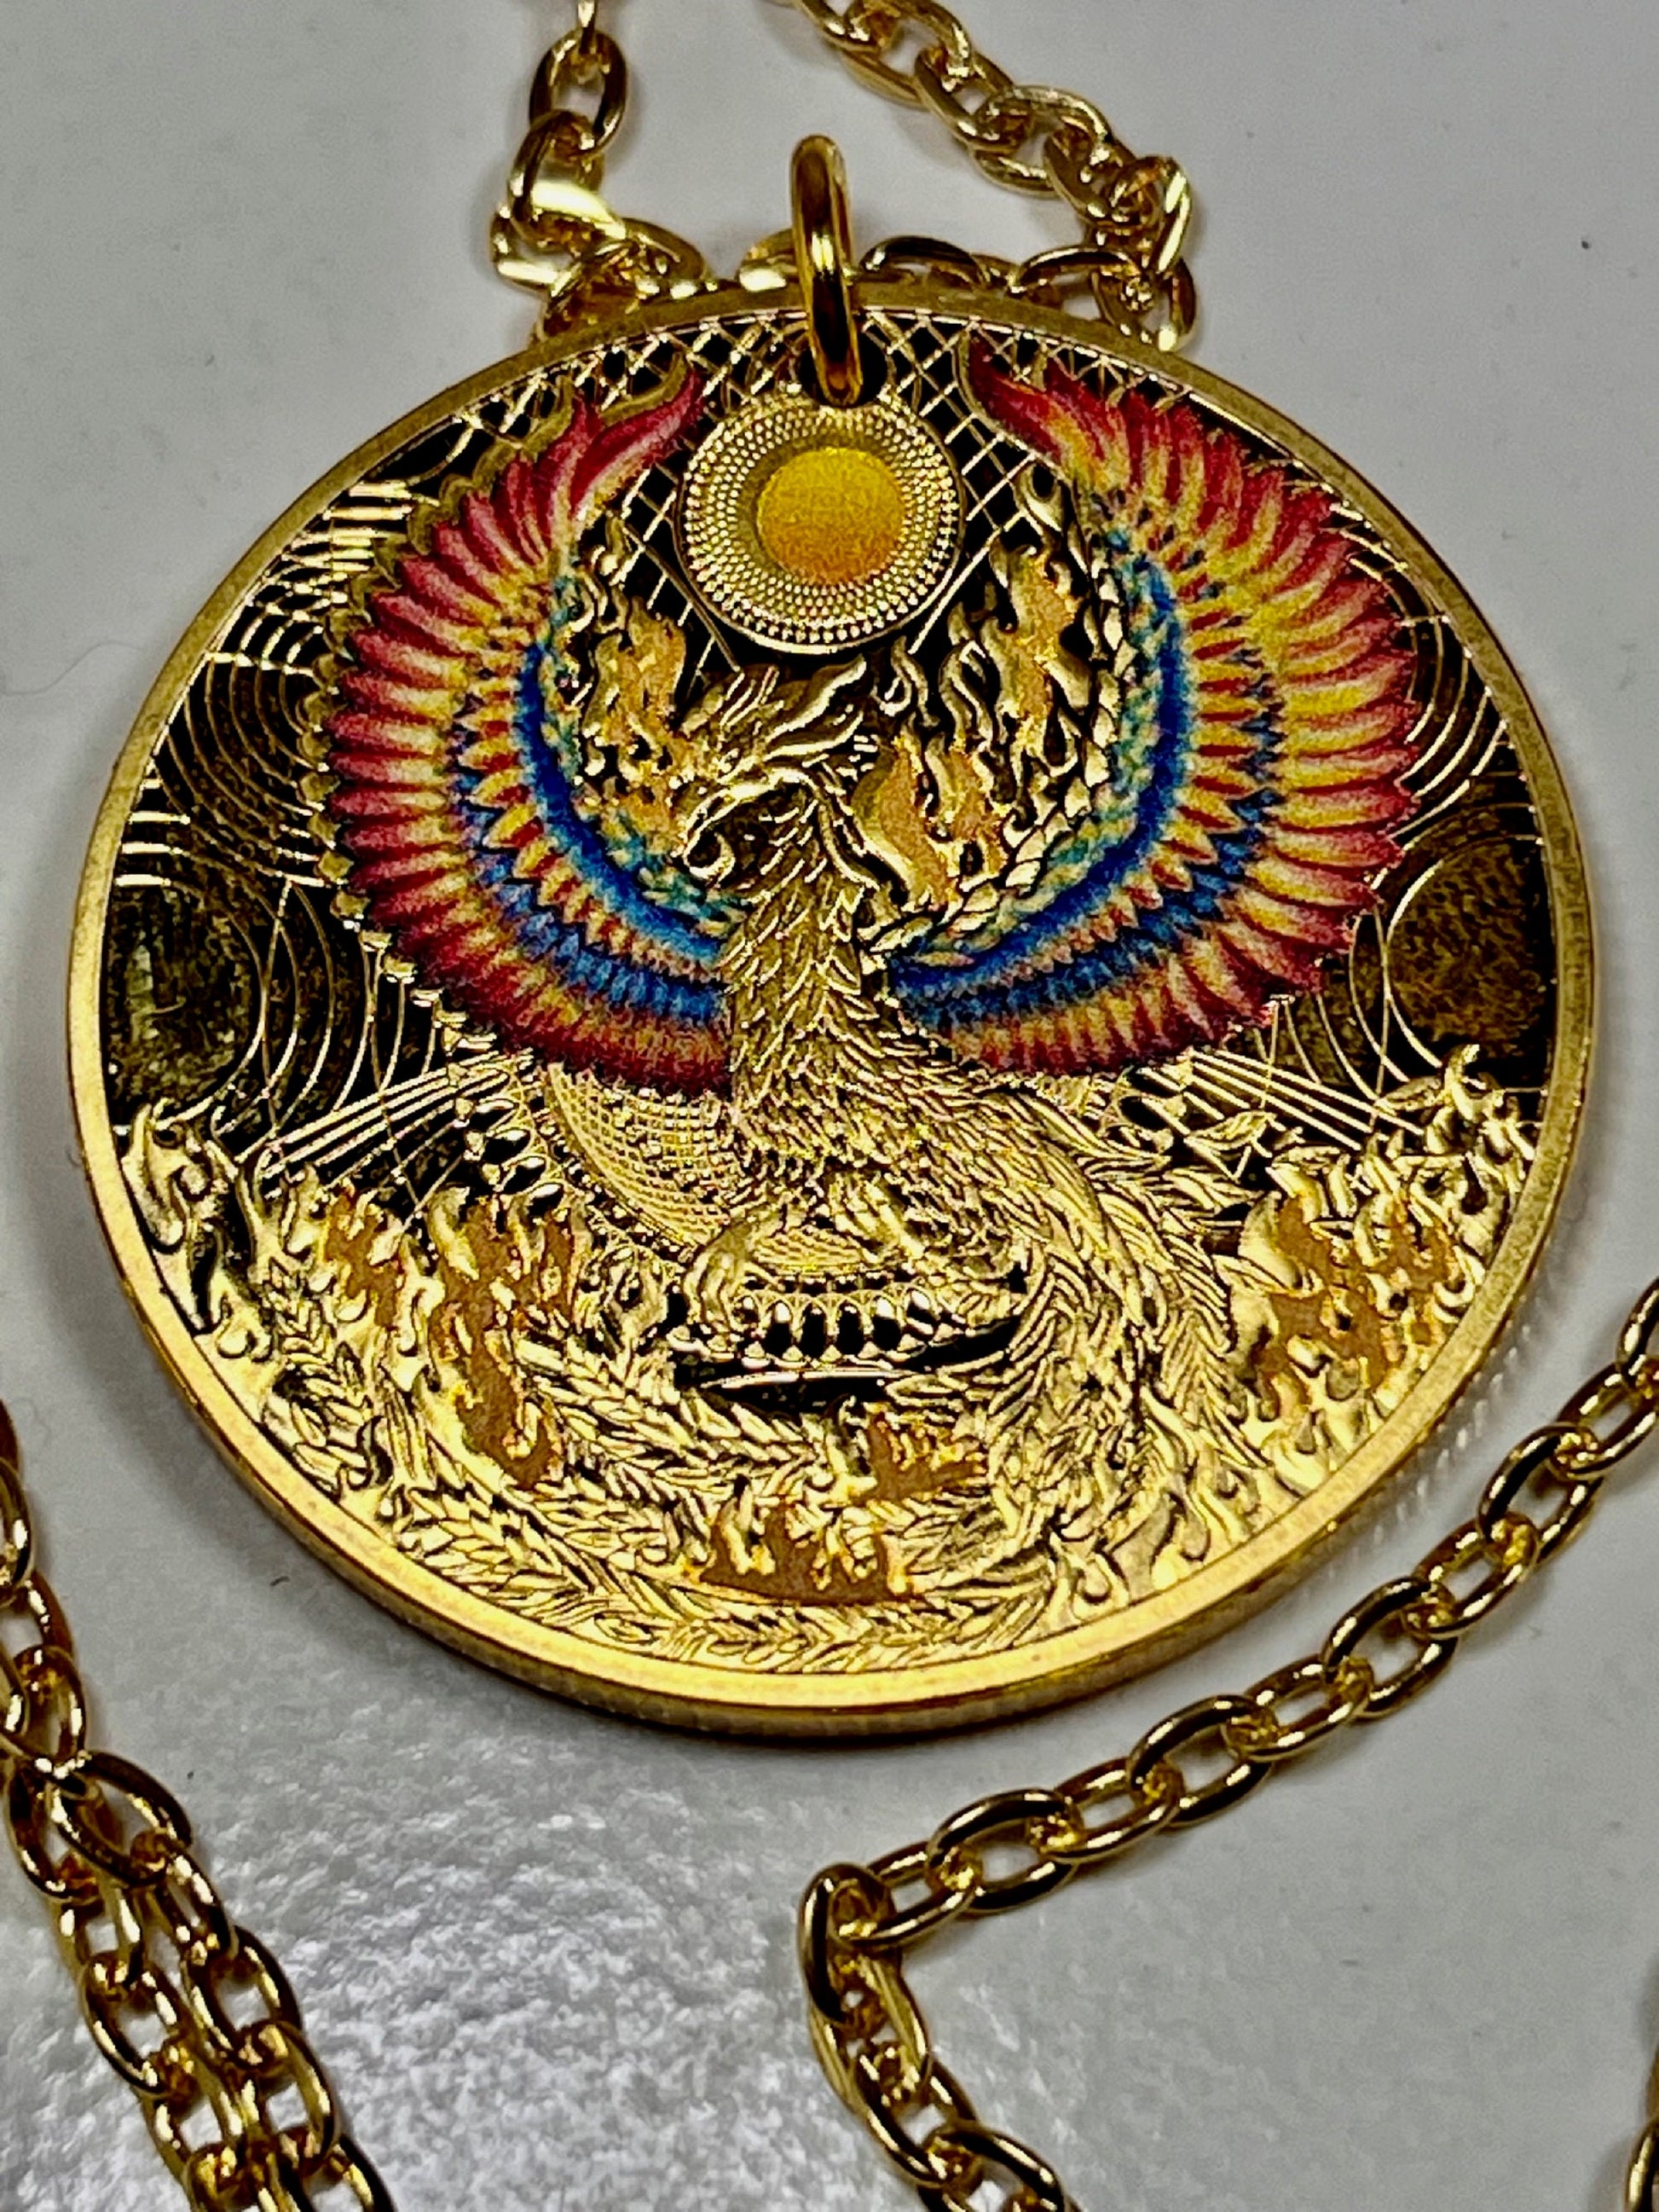 China Medallion Necklace Ancient Mythical Flaming Bird Medallion Rare Find Personal & Limited Supply